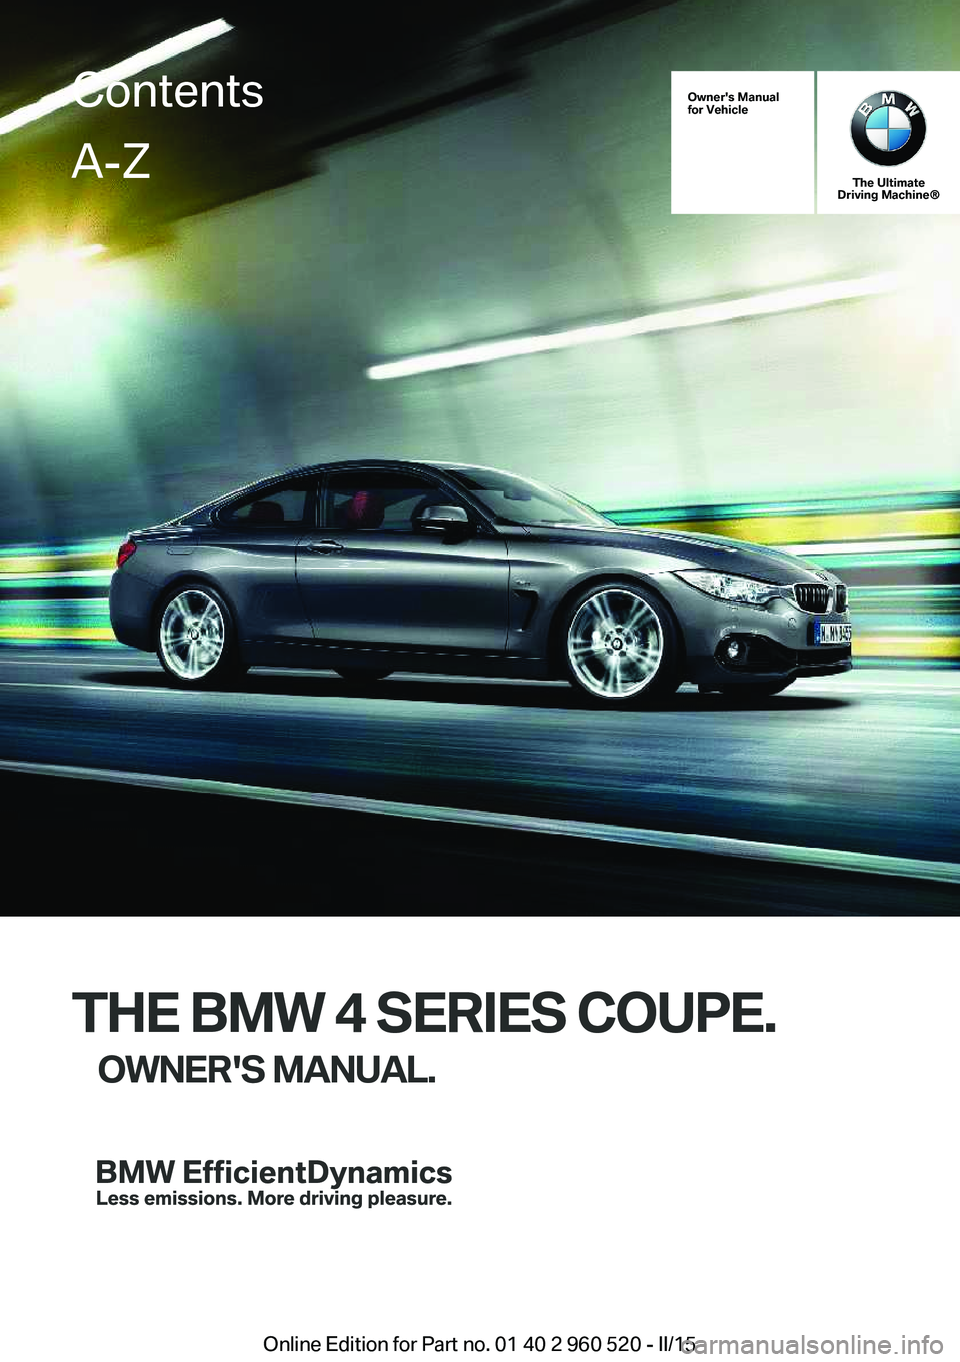 BMW 435I XDRIVE COUPE 2016  Owners Manual Owner's Manual
for Vehicle
The Ultimate
Driving Machine®
THE BMW 4 SERIES COUPE.
OWNER'S MANUAL.
ContentsA-Z
Online Edition for Part no. 01 40 2 960 520 - II/15   